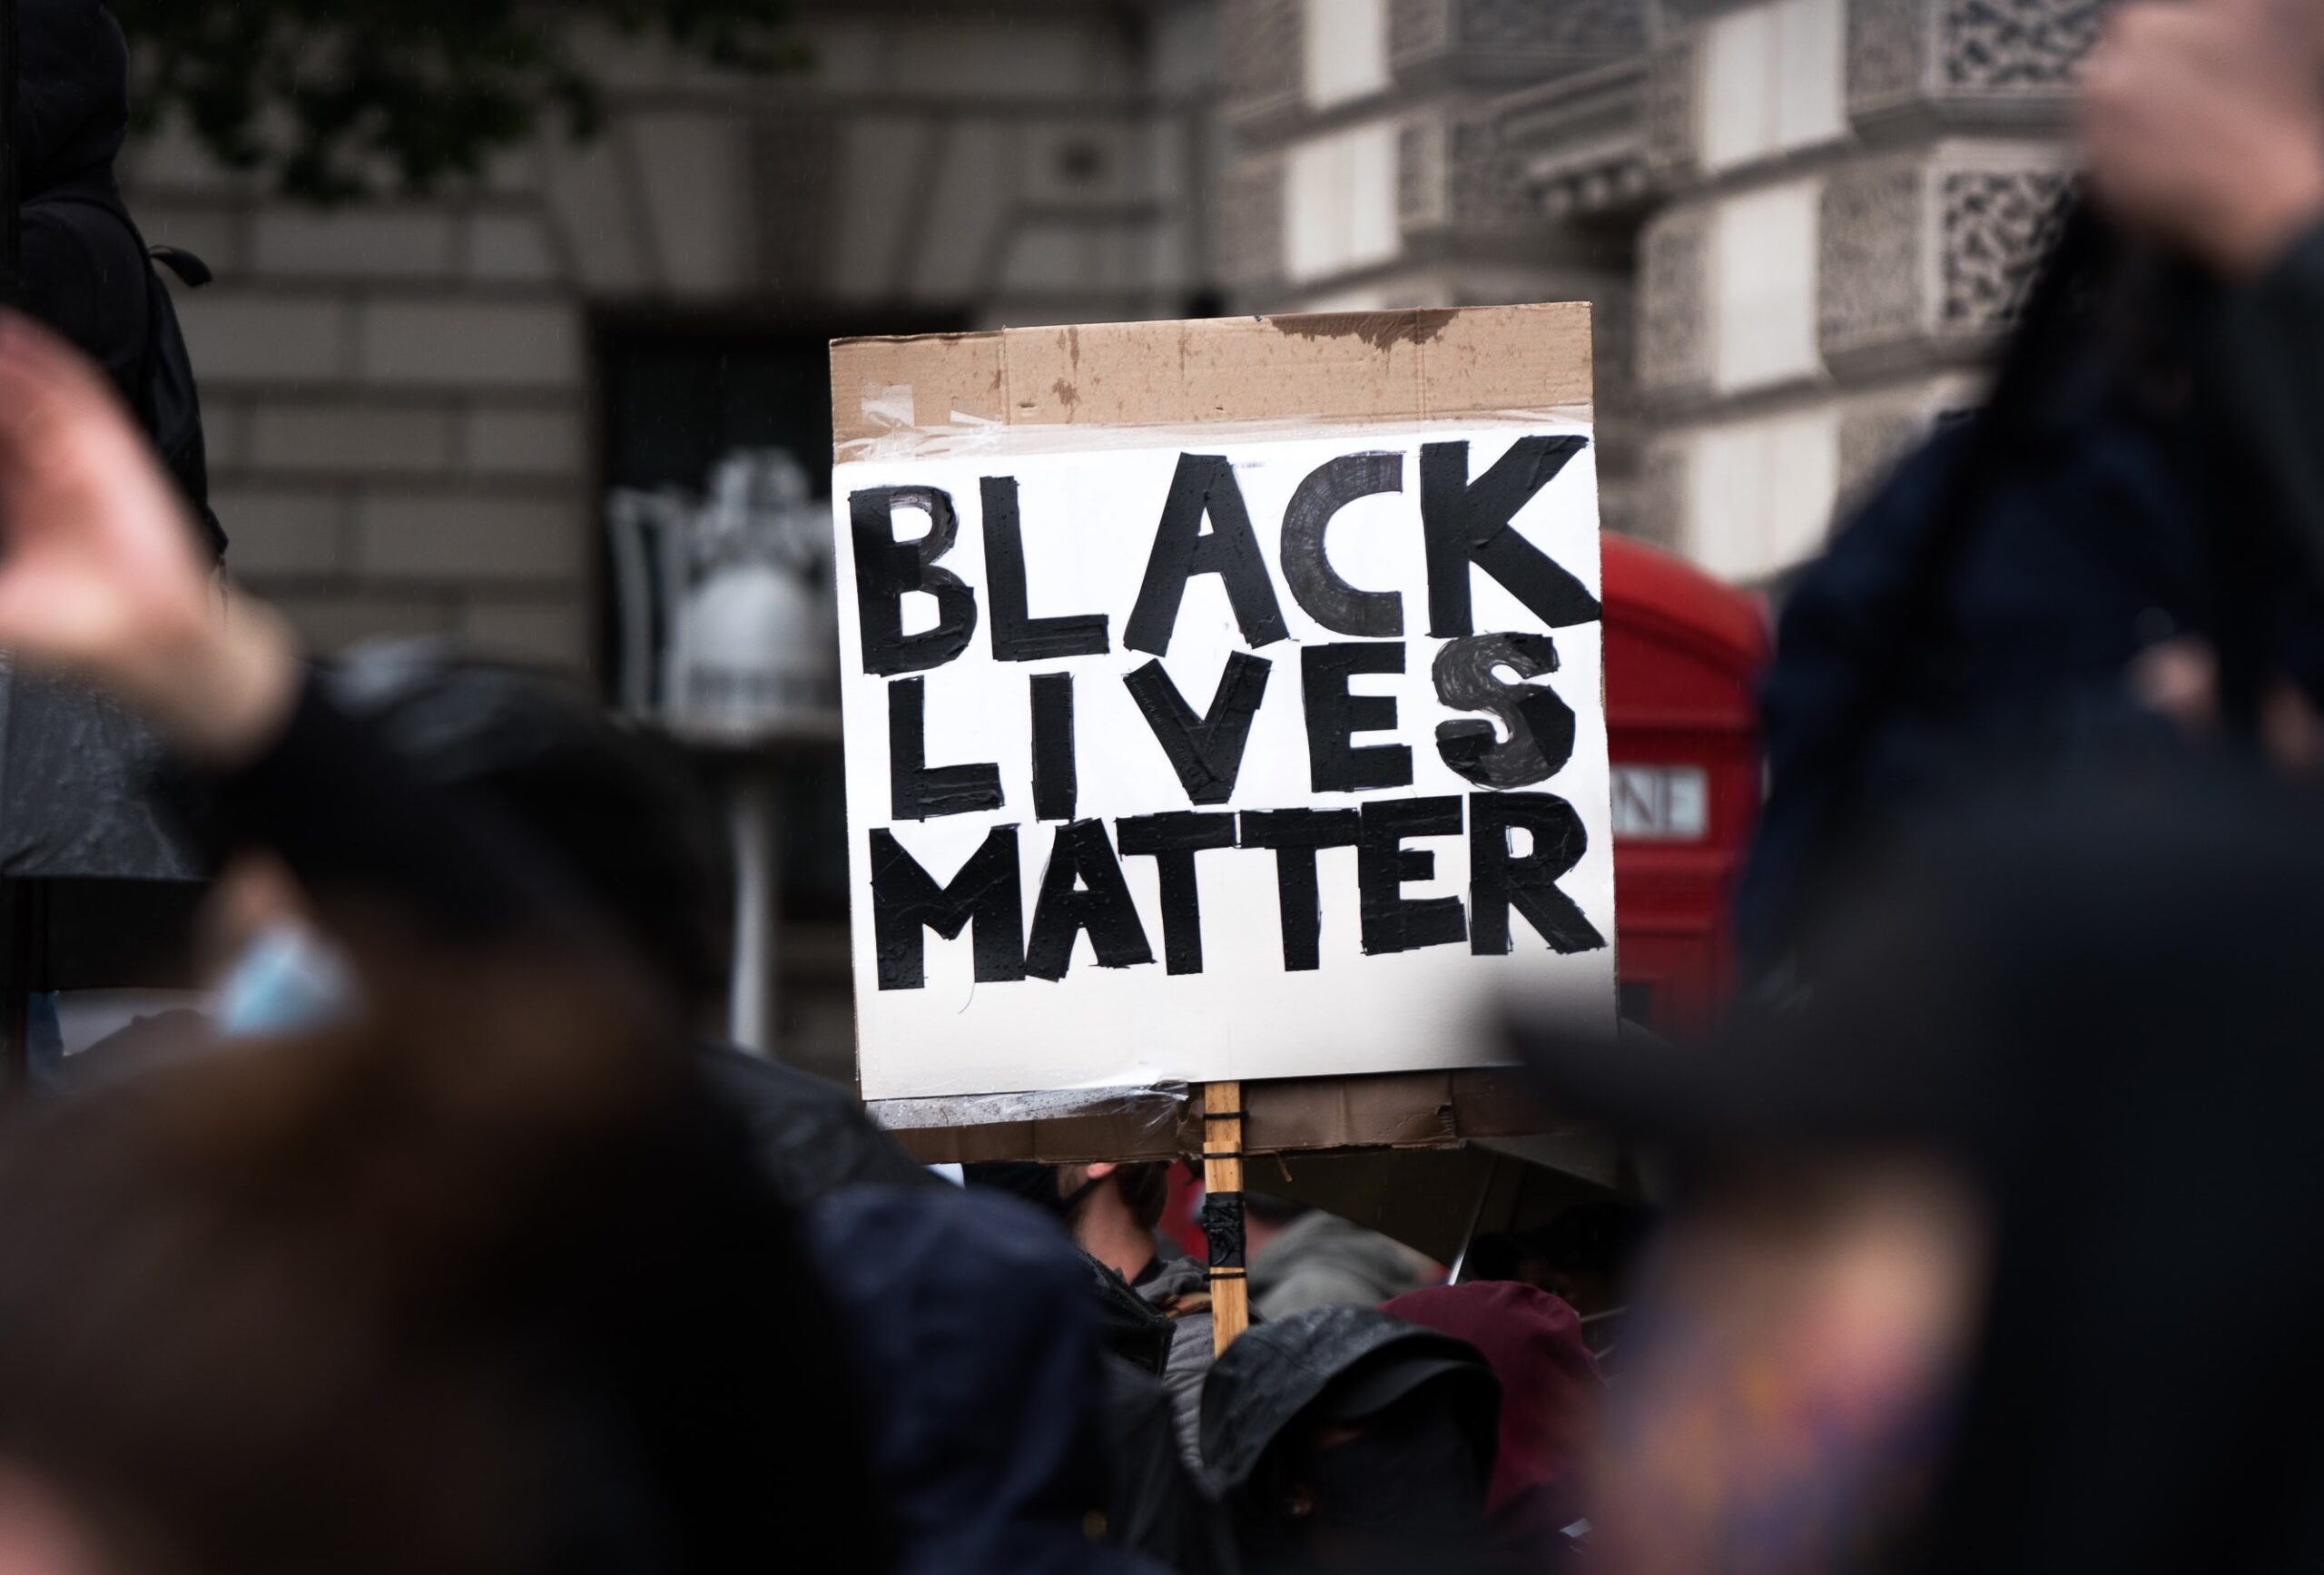 From Intent to Action: CLF Grants $11 Million for Racial Justice